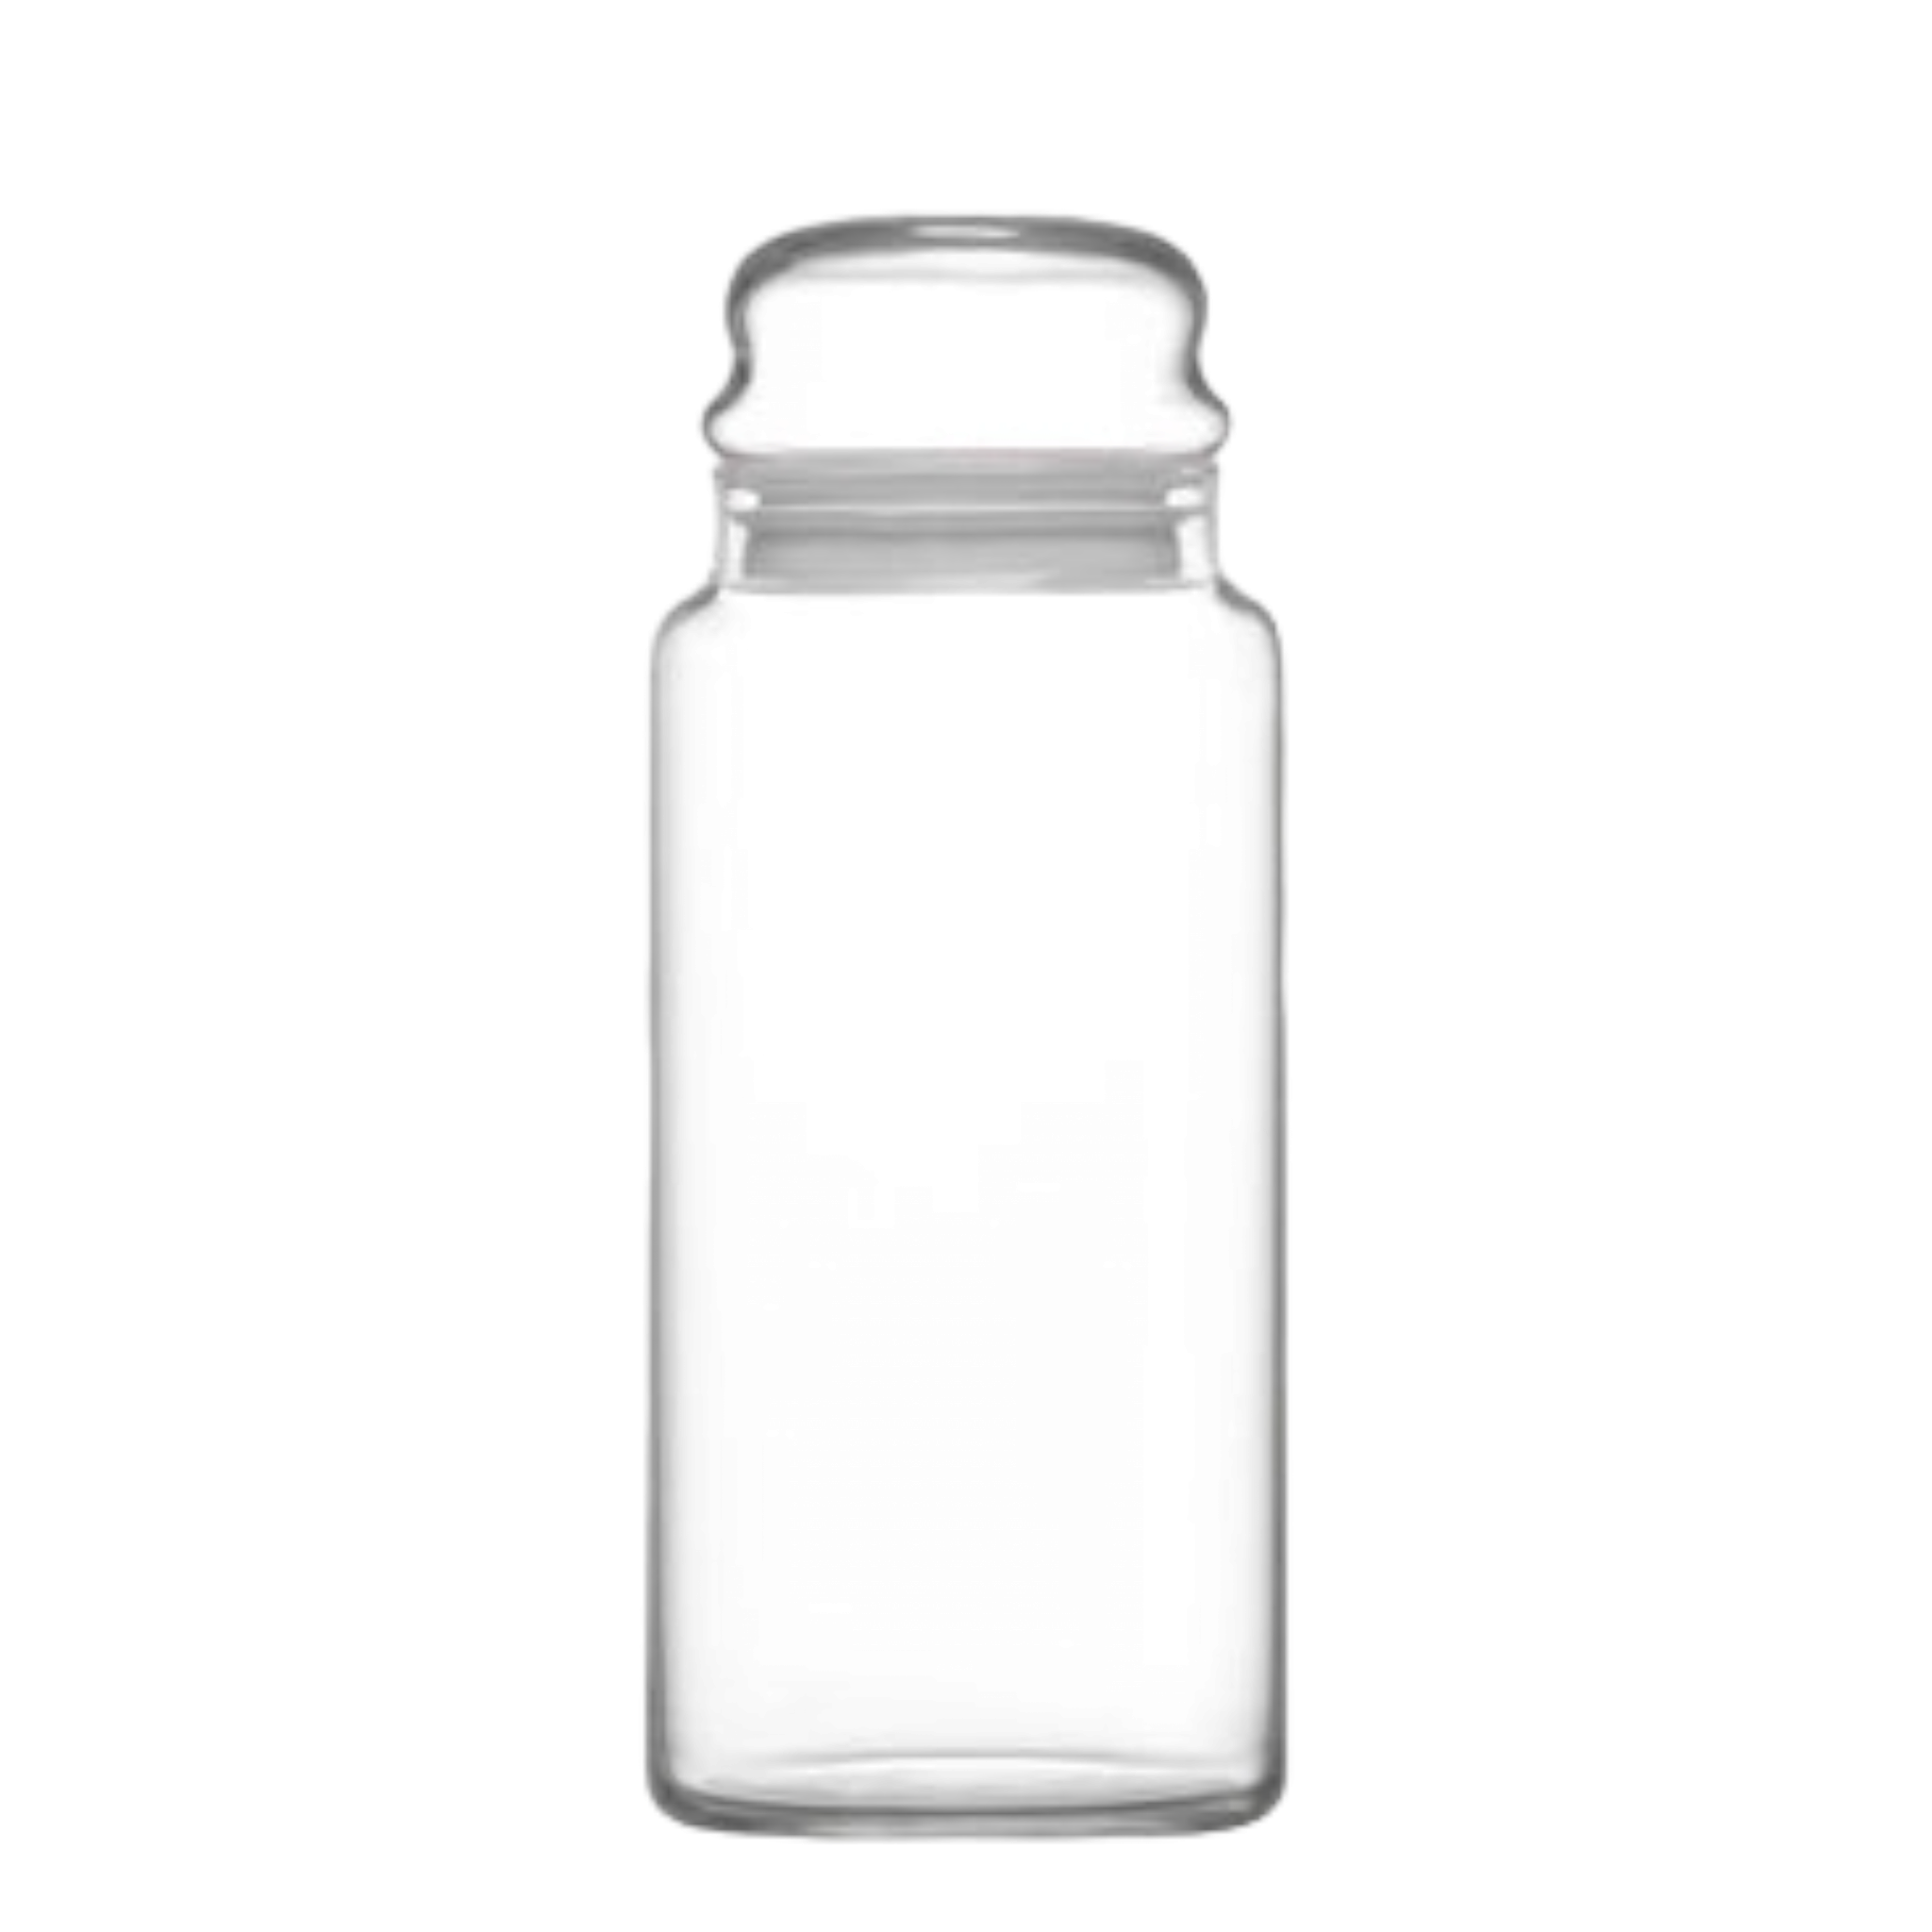 Lav Glass Canister Jar 1400ml white Lid SGN2387